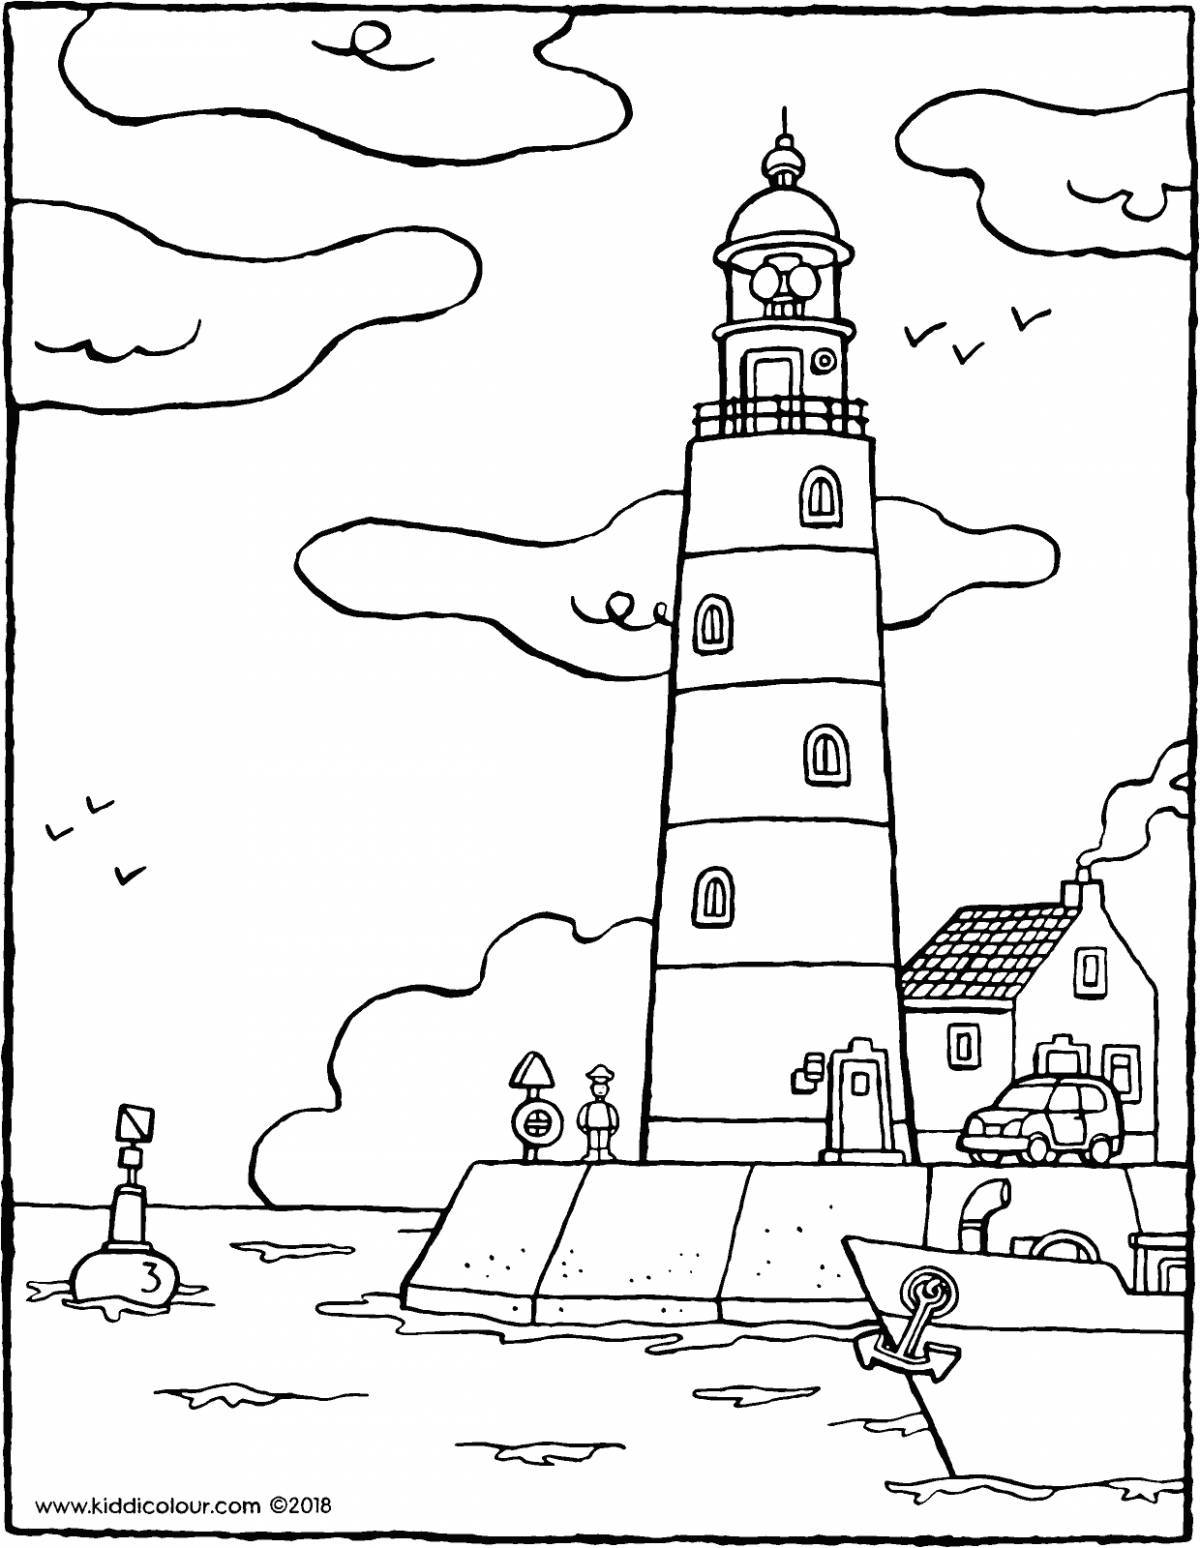 Refreshing crimea coloring page